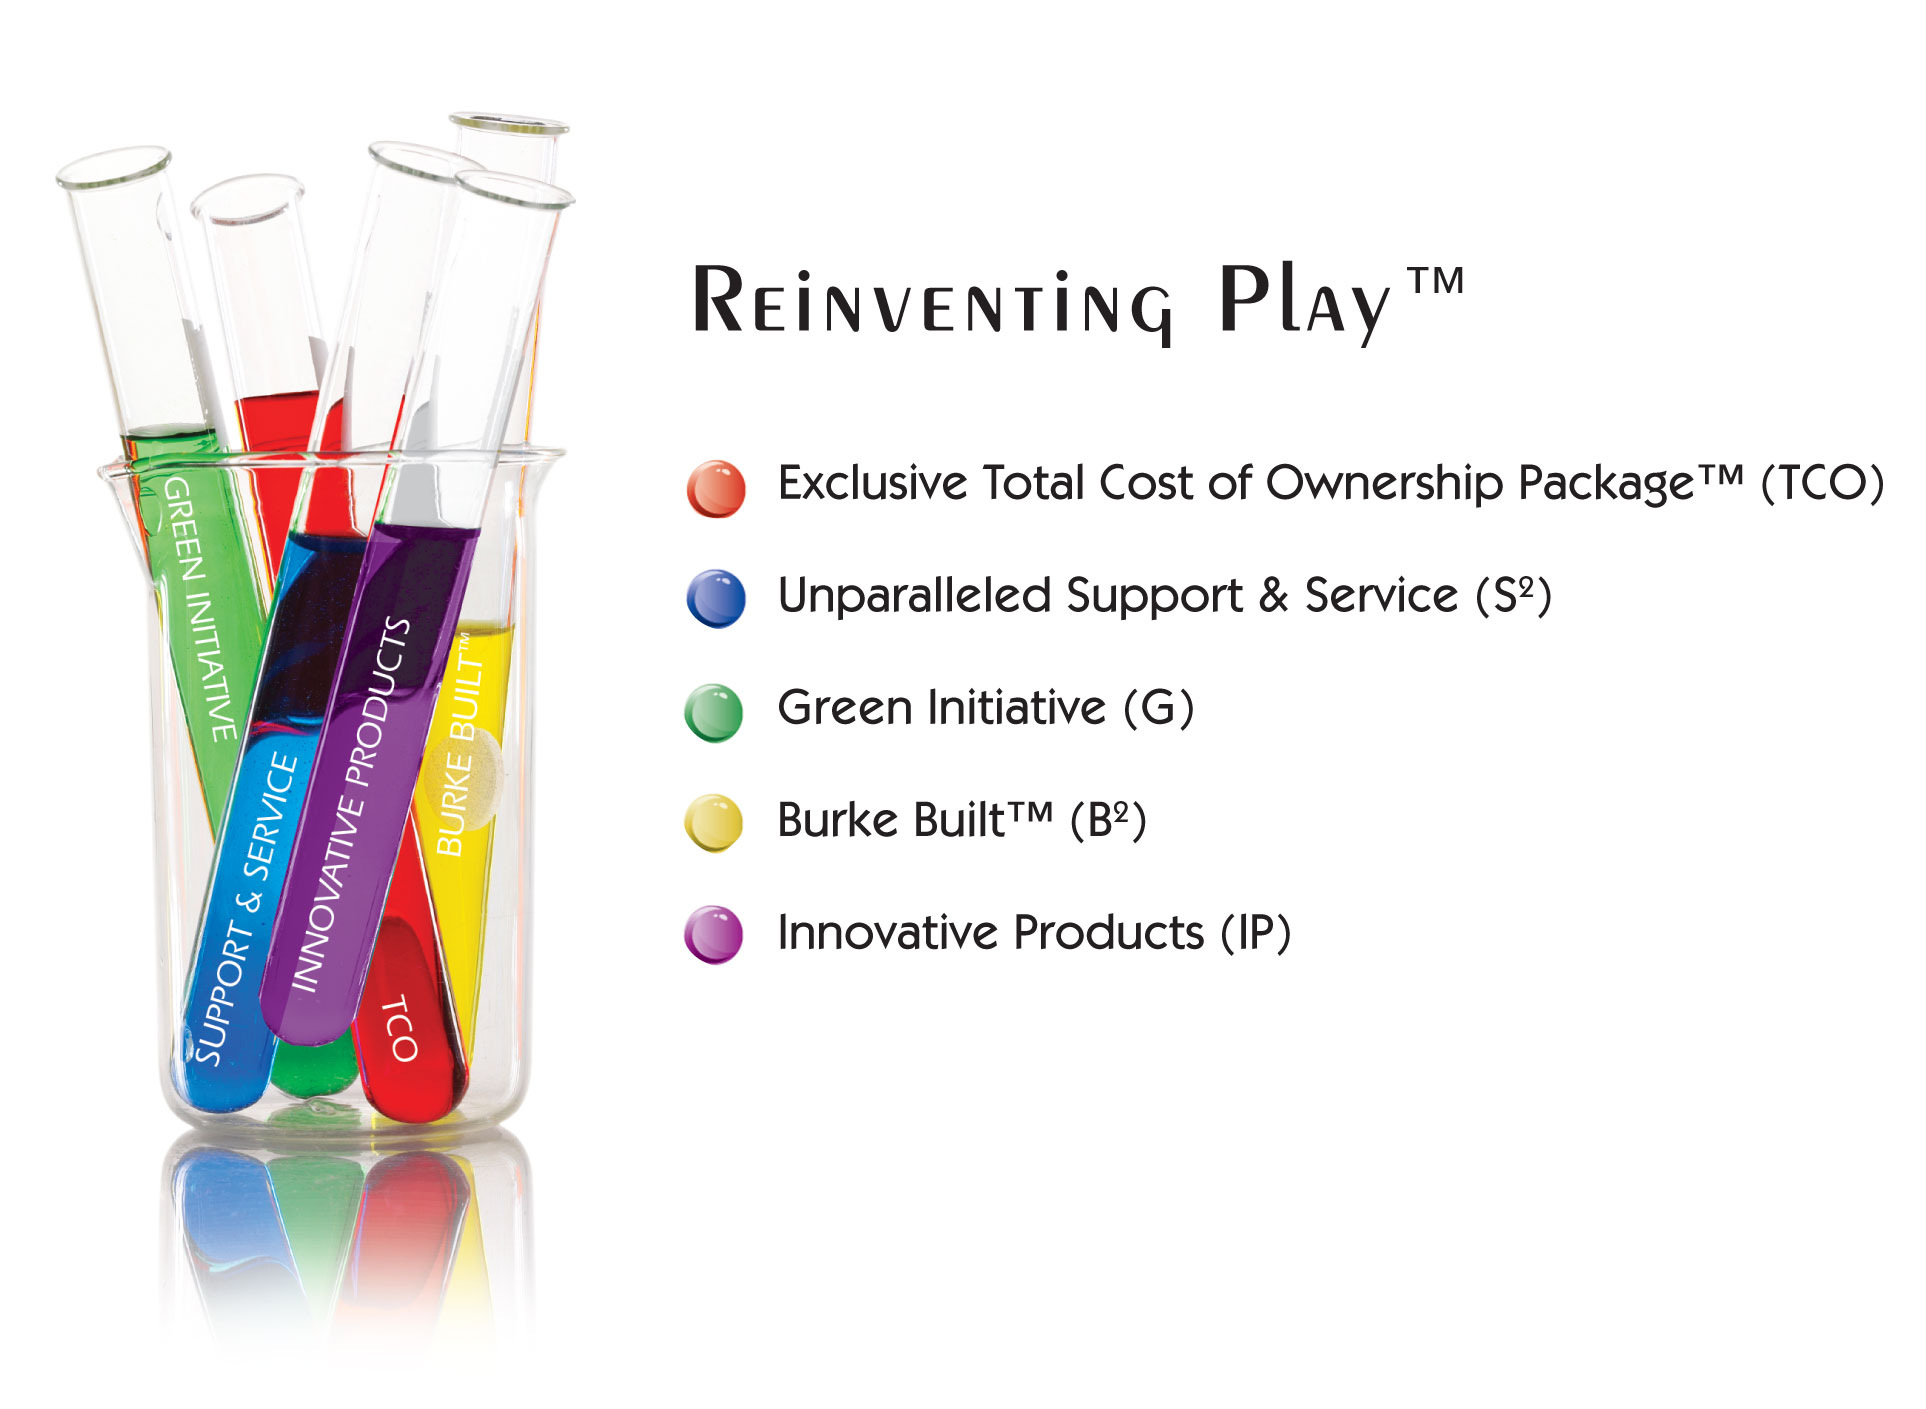 Reinventing Play